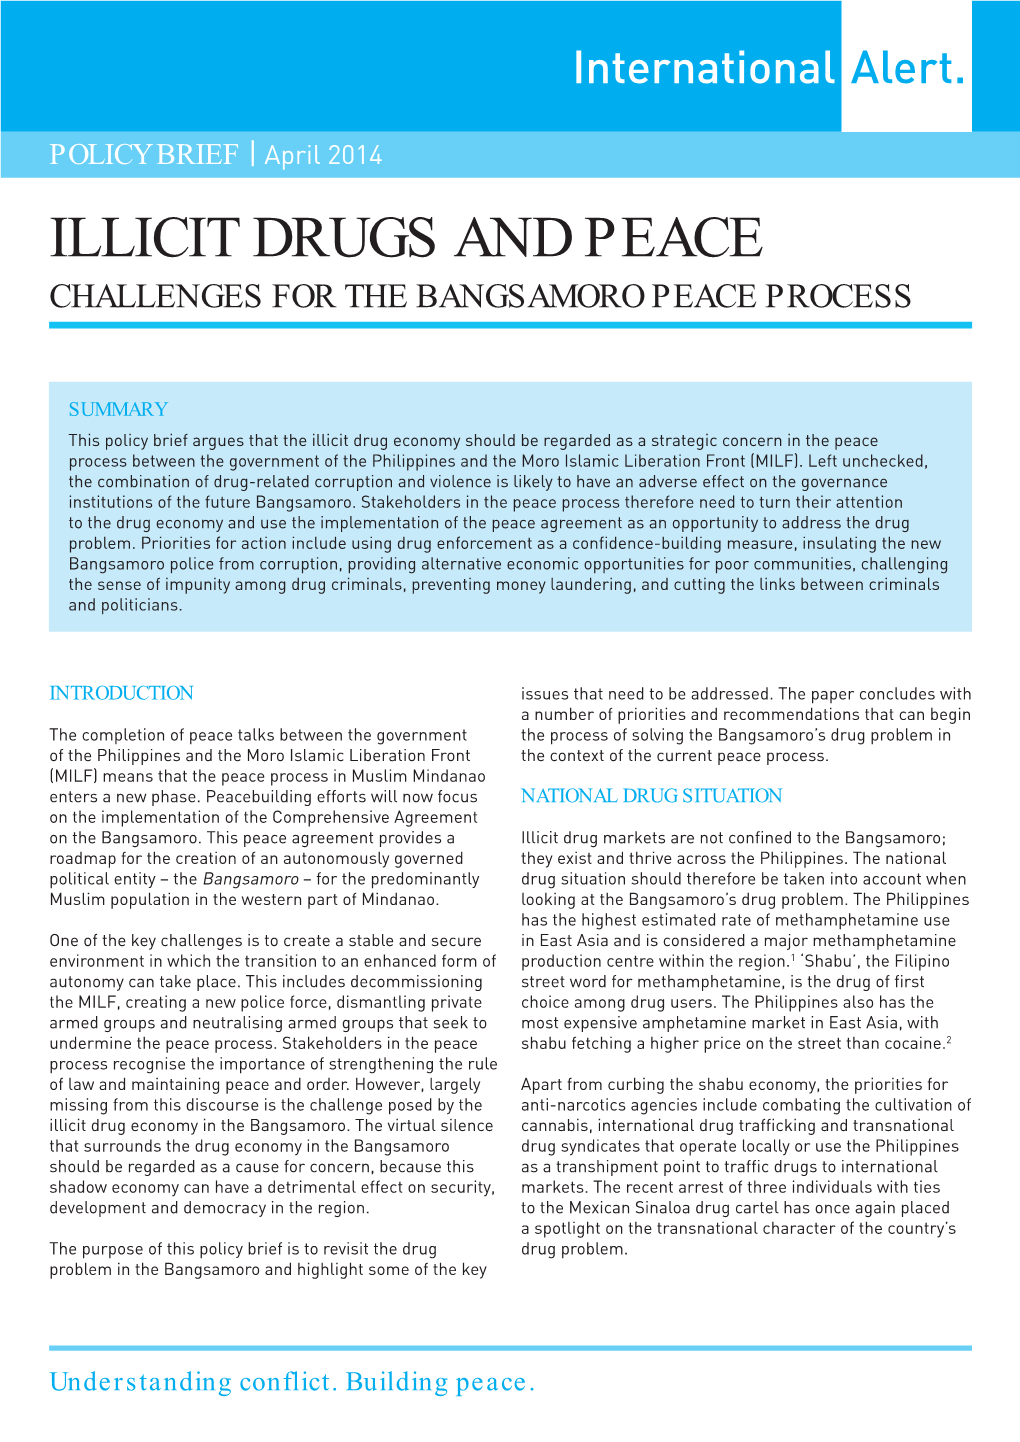 Illicit Drugs and Peace Challenges for the Bangsamoro Peace Process